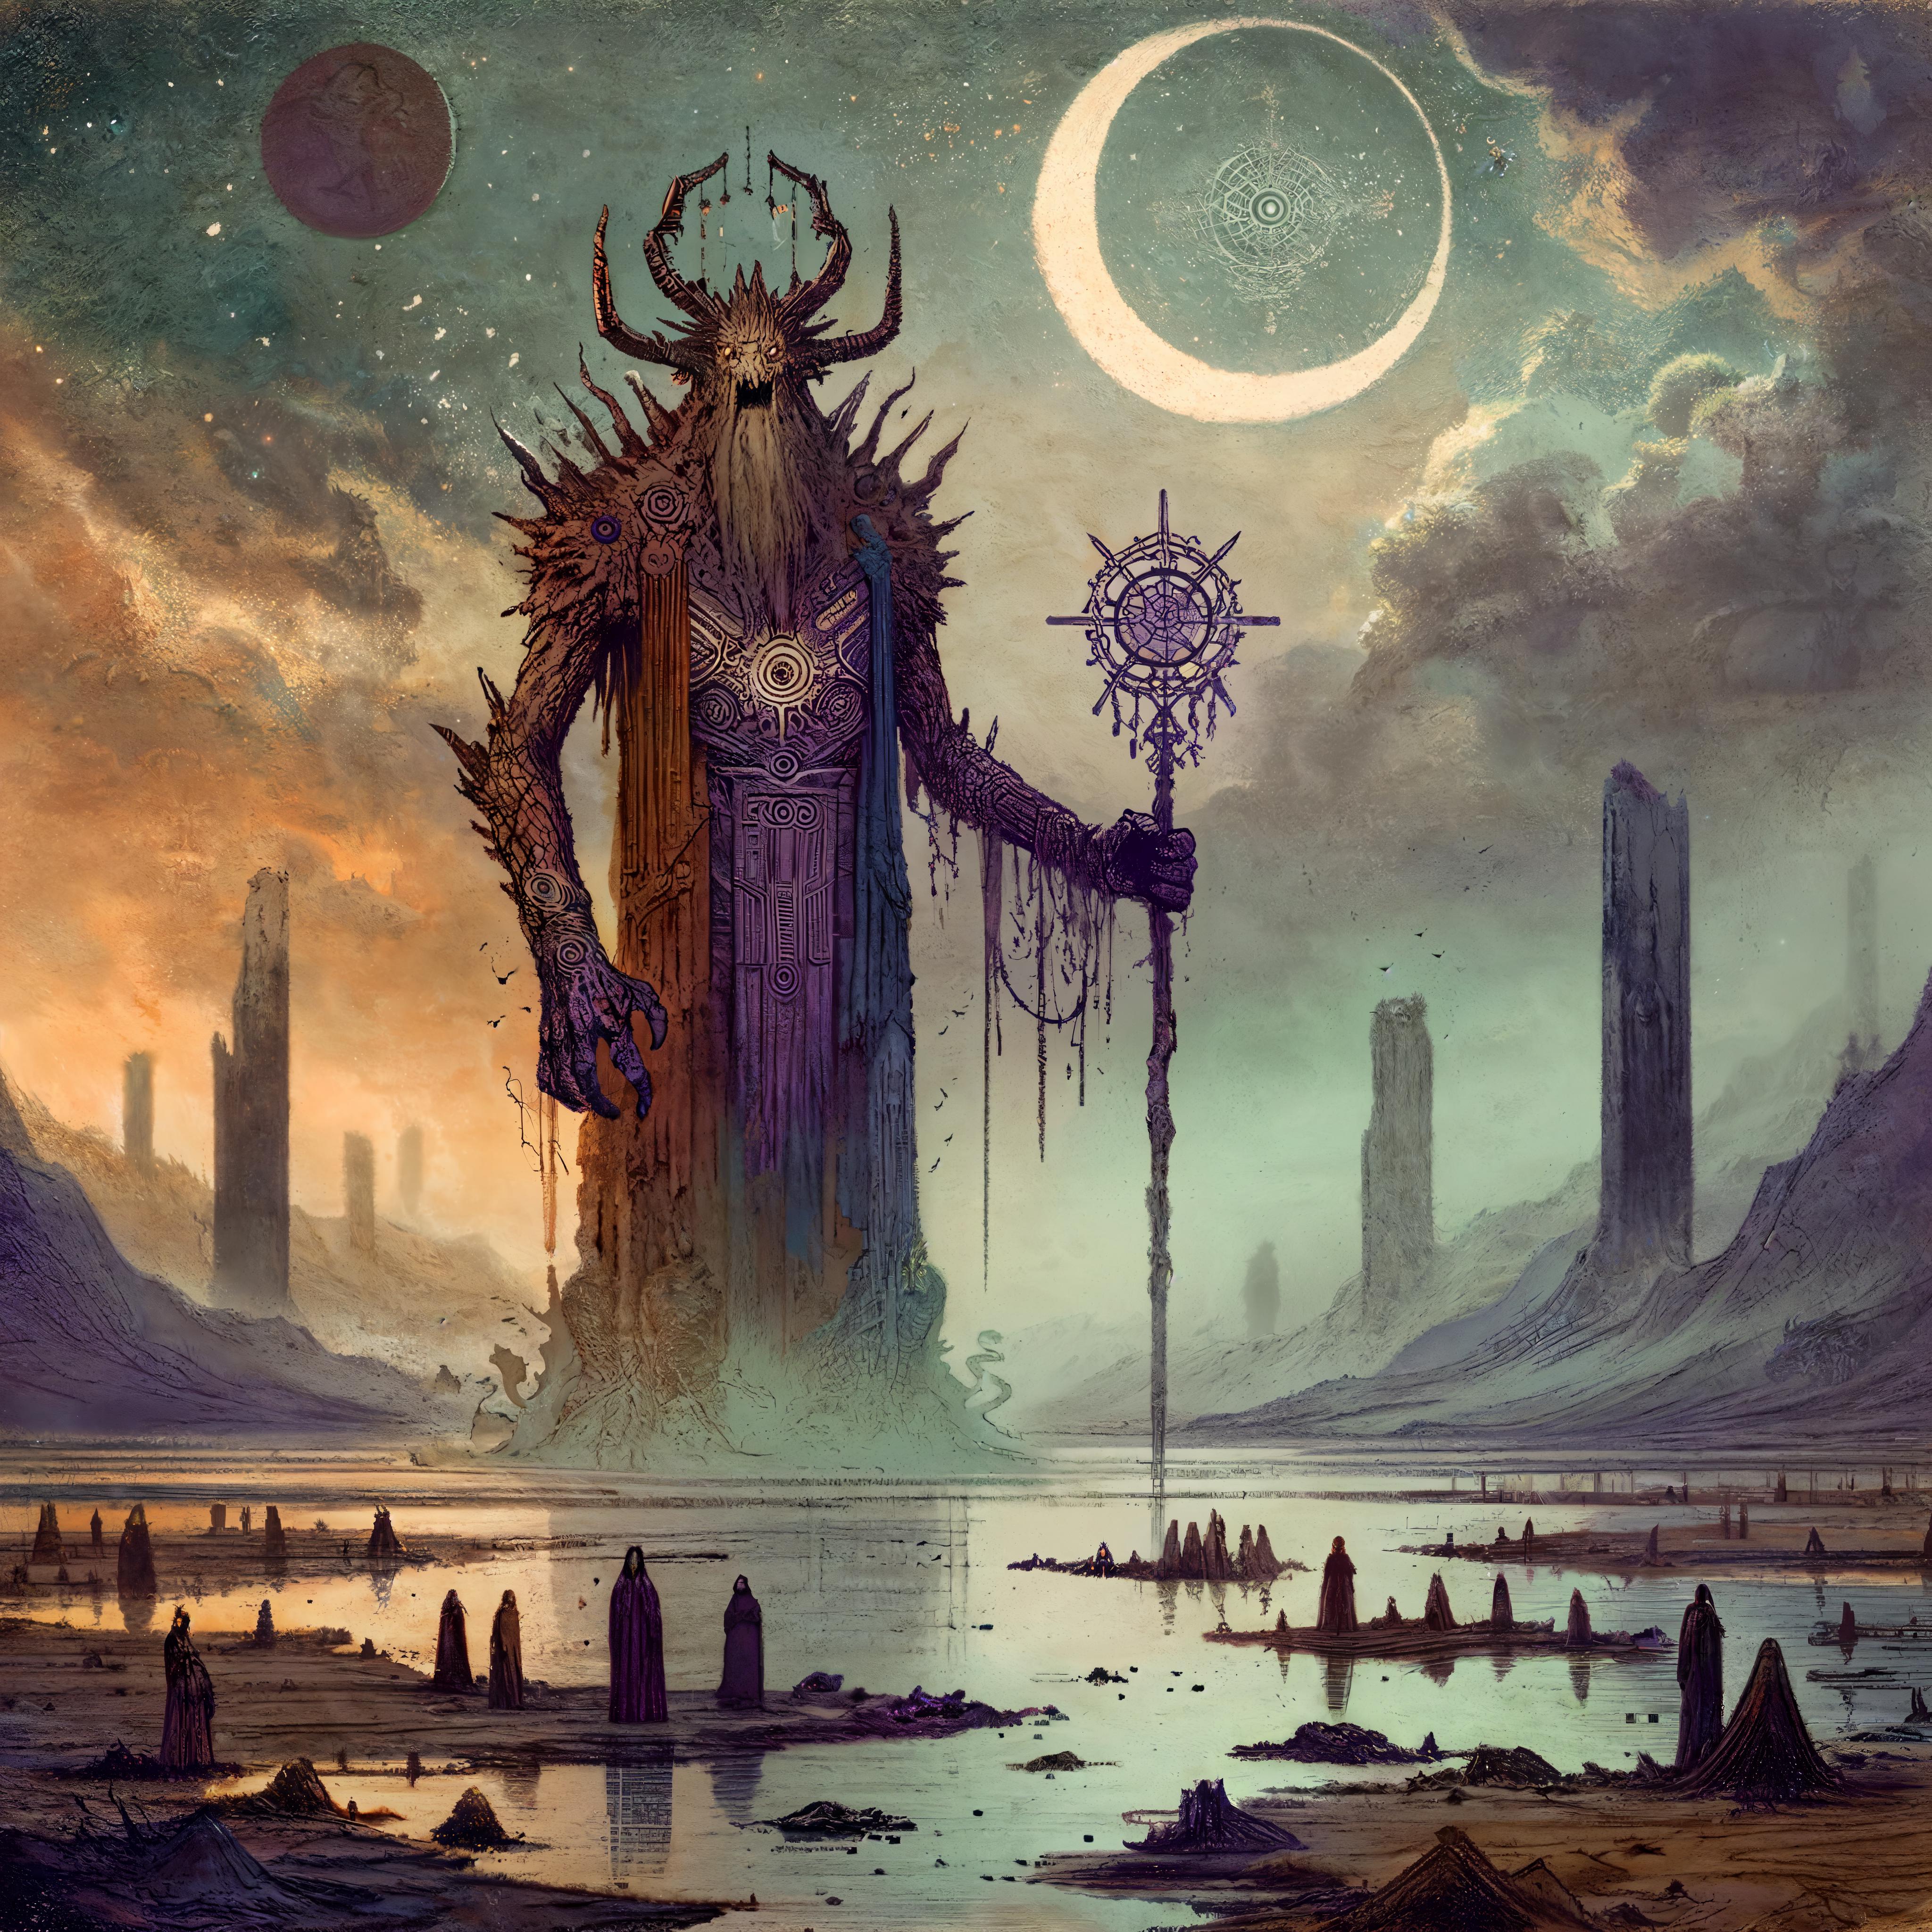 A Fantasy Artwork Featuring a Giant Warrior with a Moon in the Background